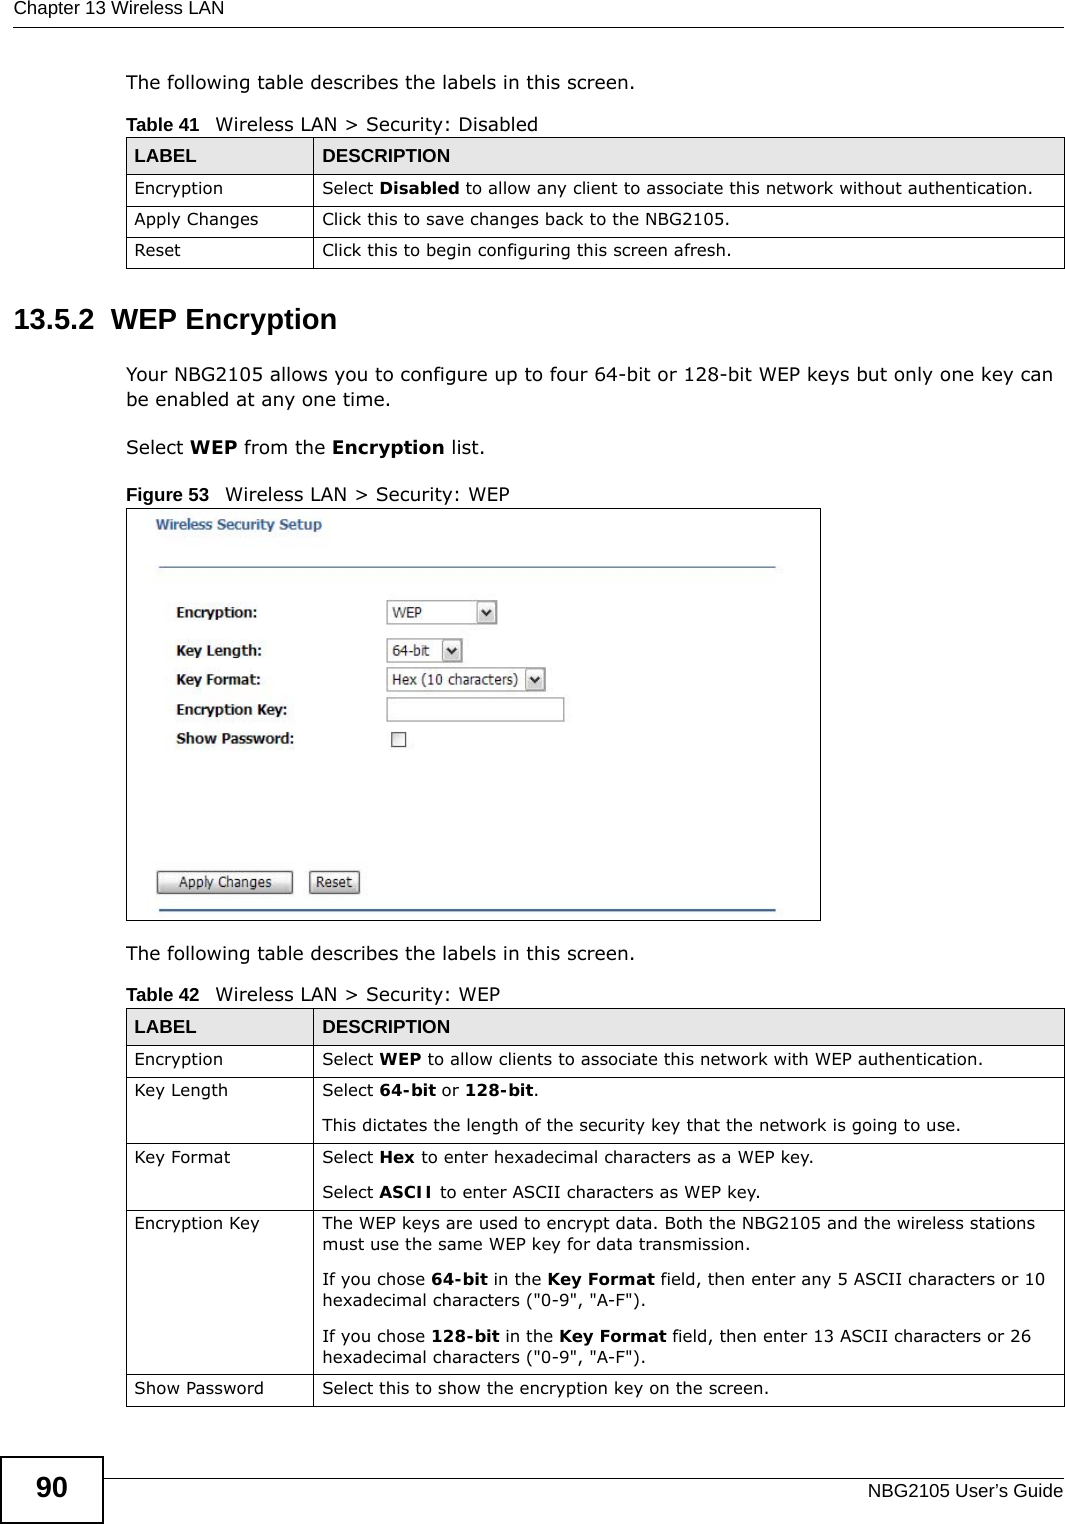 Chapter 13 Wireless LANNBG2105 User’s Guide90The following table describes the labels in this screen.13.5.2  WEP EncryptionYour NBG2105 allows you to configure up to four 64-bit or 128-bit WEP keys but only one key can be enabled at any one time.Select WEP from the Encryption list.Figure 53   Wireless LAN &gt; Security: WEP The following table describes the labels in this screen.Table 41   Wireless LAN &gt; Security: DisabledLABEL DESCRIPTIONEncryption Select Disabled to allow any client to associate this network without authentication.Apply Changes Click this to save changes back to the NBG2105.Reset Click this to begin configuring this screen afresh.Table 42   Wireless LAN &gt; Security: WEPLABEL DESCRIPTIONEncryption Select WEP to allow clients to associate this network with WEP authentication.Key Length Select 64-bit or 128-bit.This dictates the length of the security key that the network is going to use.Key Format Select Hex to enter hexadecimal characters as a WEP key. Select ASCII to enter ASCII characters as WEP key. Encryption Key The WEP keys are used to encrypt data. Both the NBG2105 and the wireless stations must use the same WEP key for data transmission.If you chose 64-bit in the Key Format field, then enter any 5 ASCII characters or 10 hexadecimal characters (&quot;0-9&quot;, &quot;A-F&quot;).If you chose 128-bit in the Key Format field, then enter 13 ASCII characters or 26 hexadecimal characters (&quot;0-9&quot;, &quot;A-F&quot;). Show Password Select this to show the encryption key on the screen.